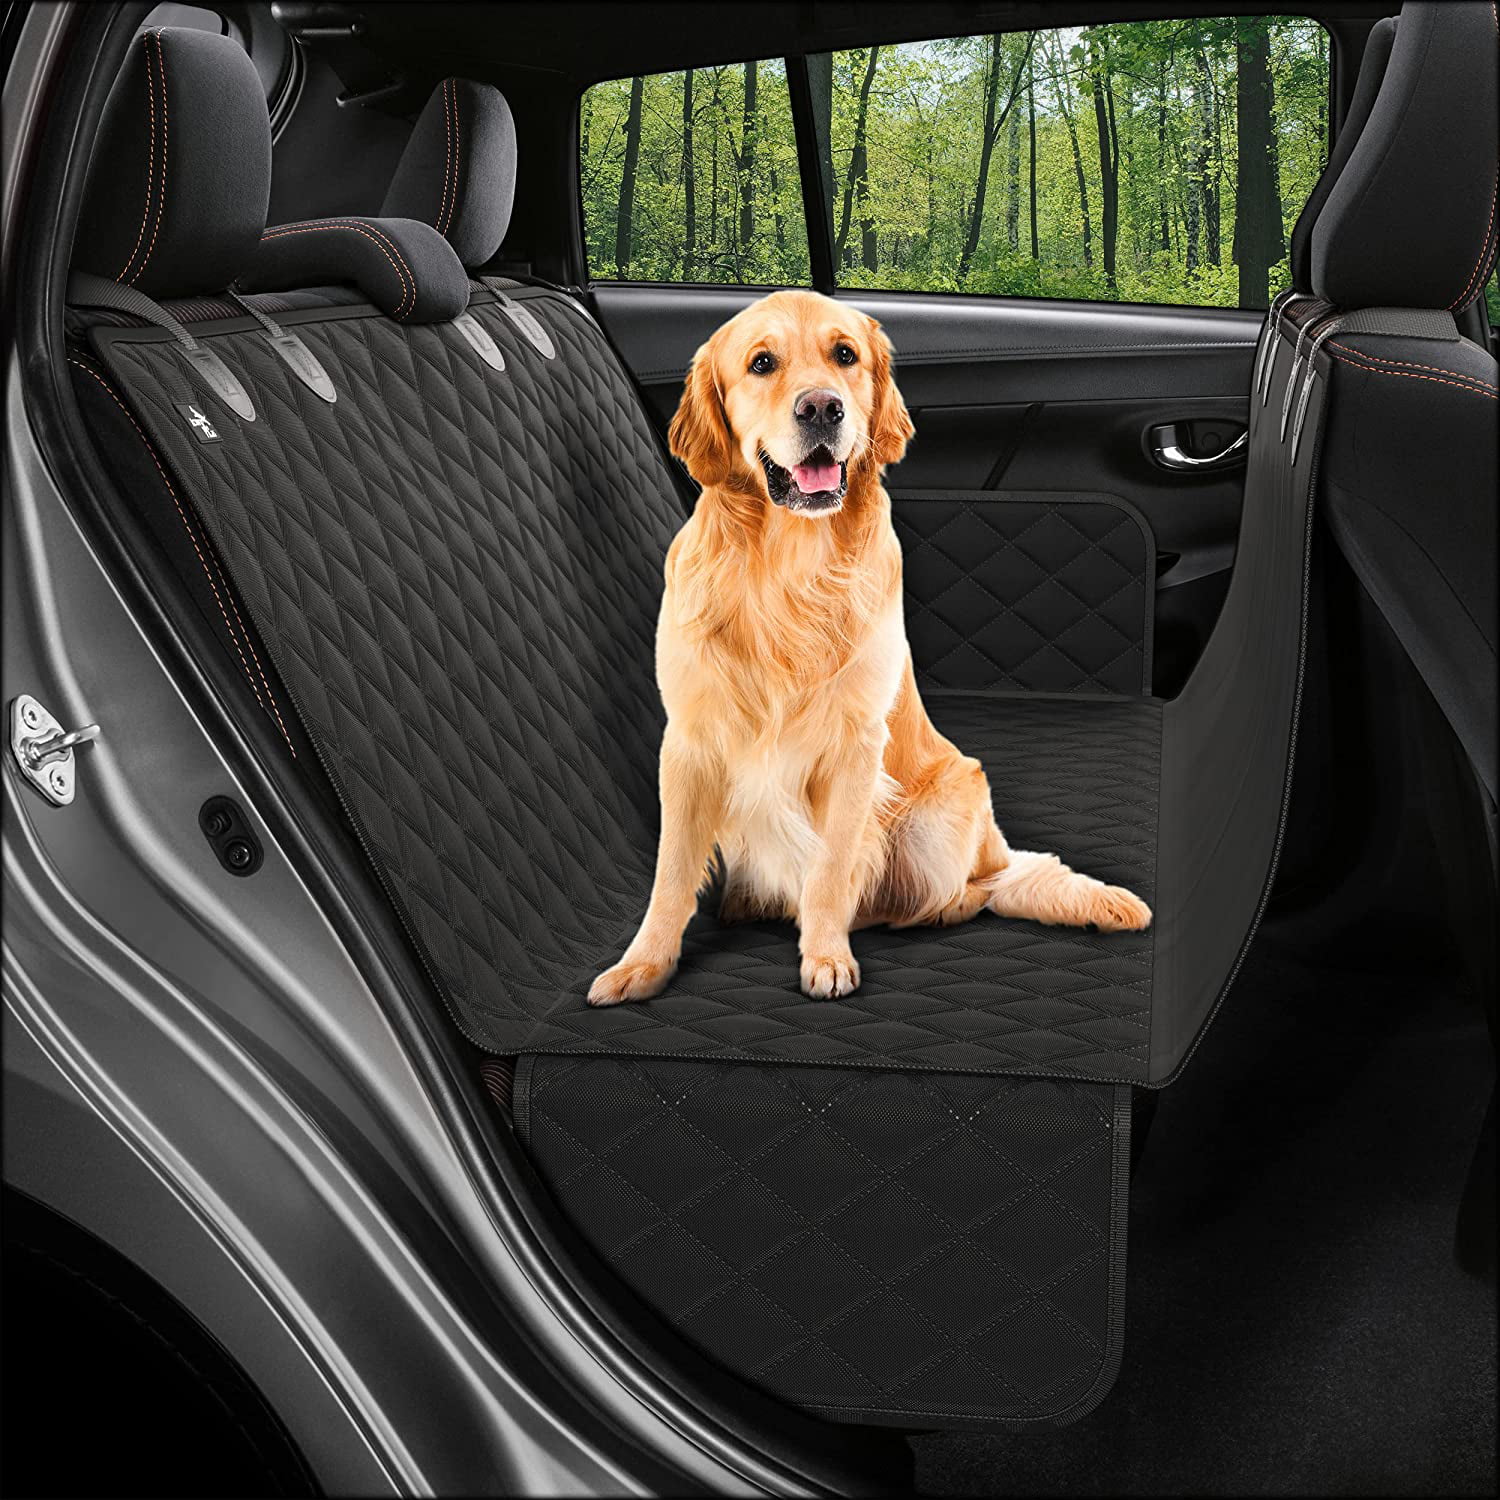 SUPSOO Dog Car Seat Cover Waterproof Durable Anti-Scratch Nonslip Back Seat Pet Protection Dog Travel Hammock with Side Flaps for Cars/Trucks/SUV 